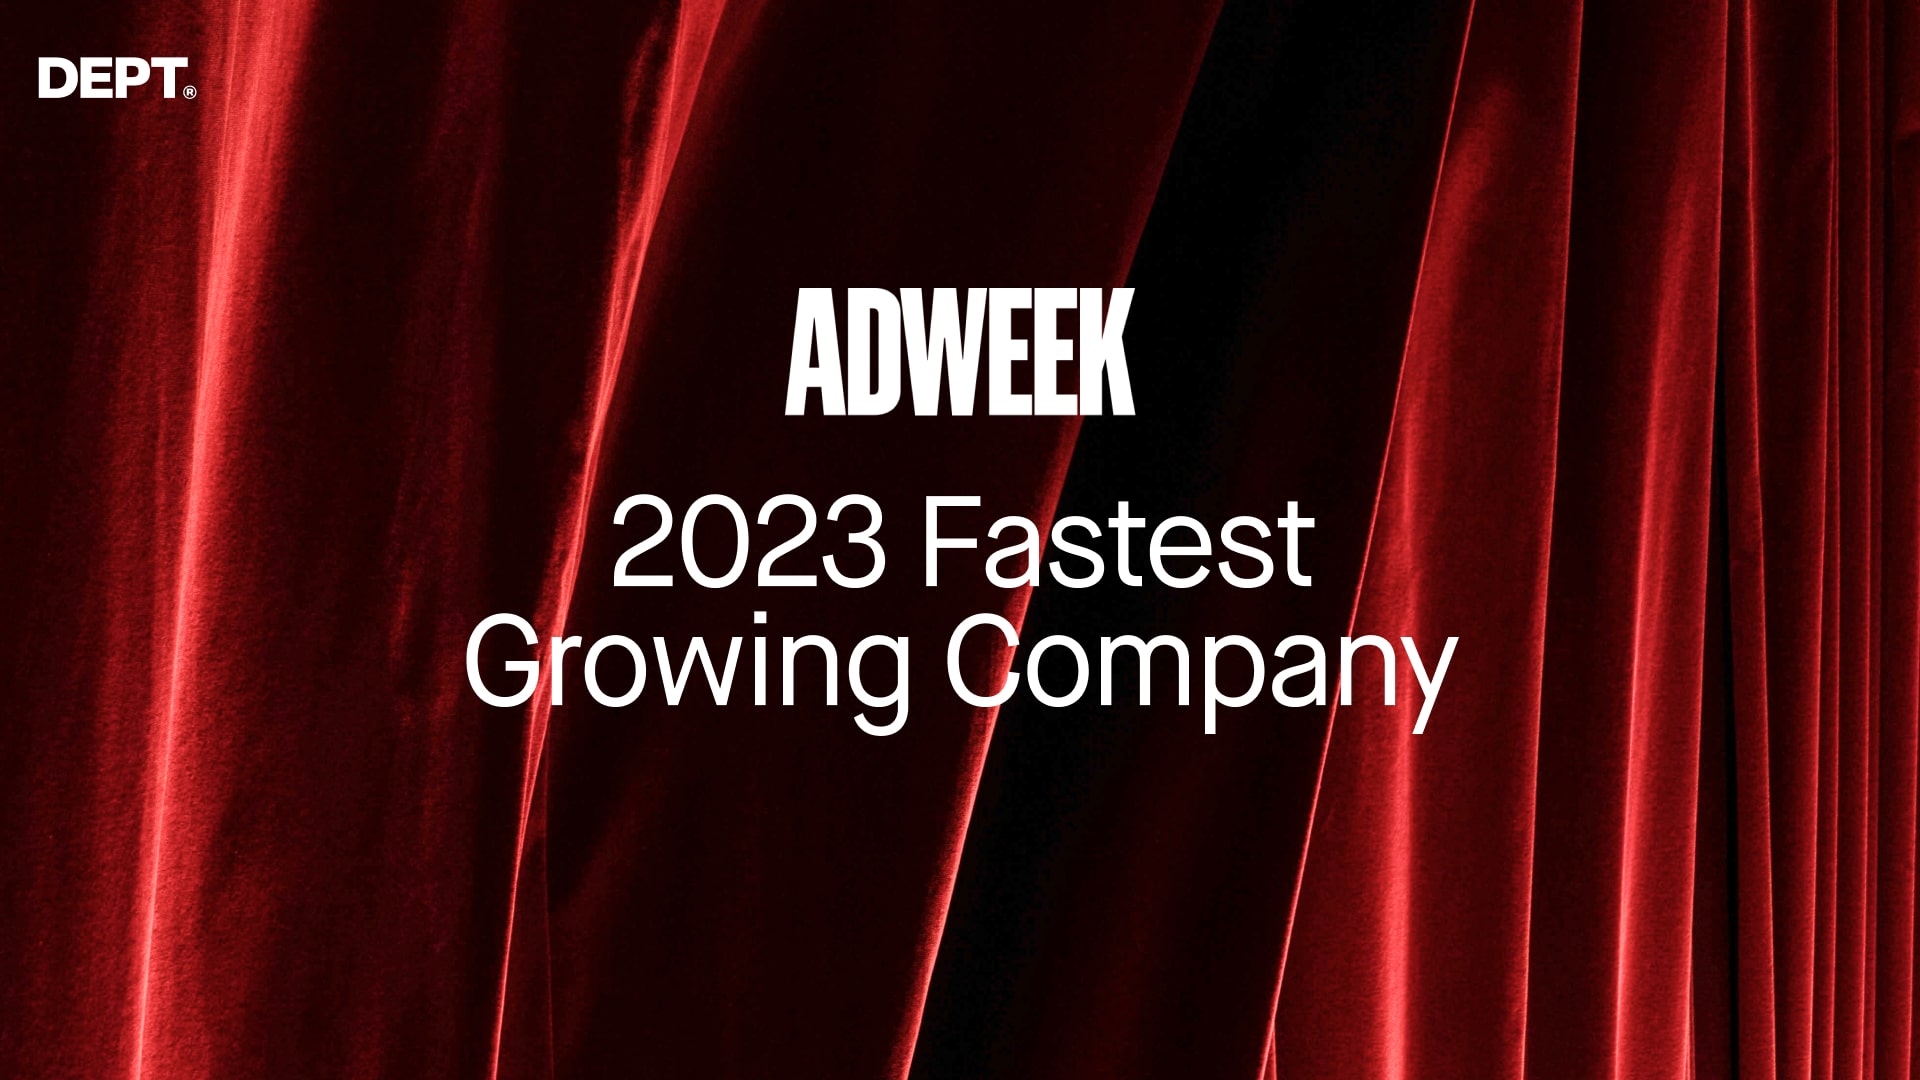 Adweek 2023 Fastest growing company text with red background